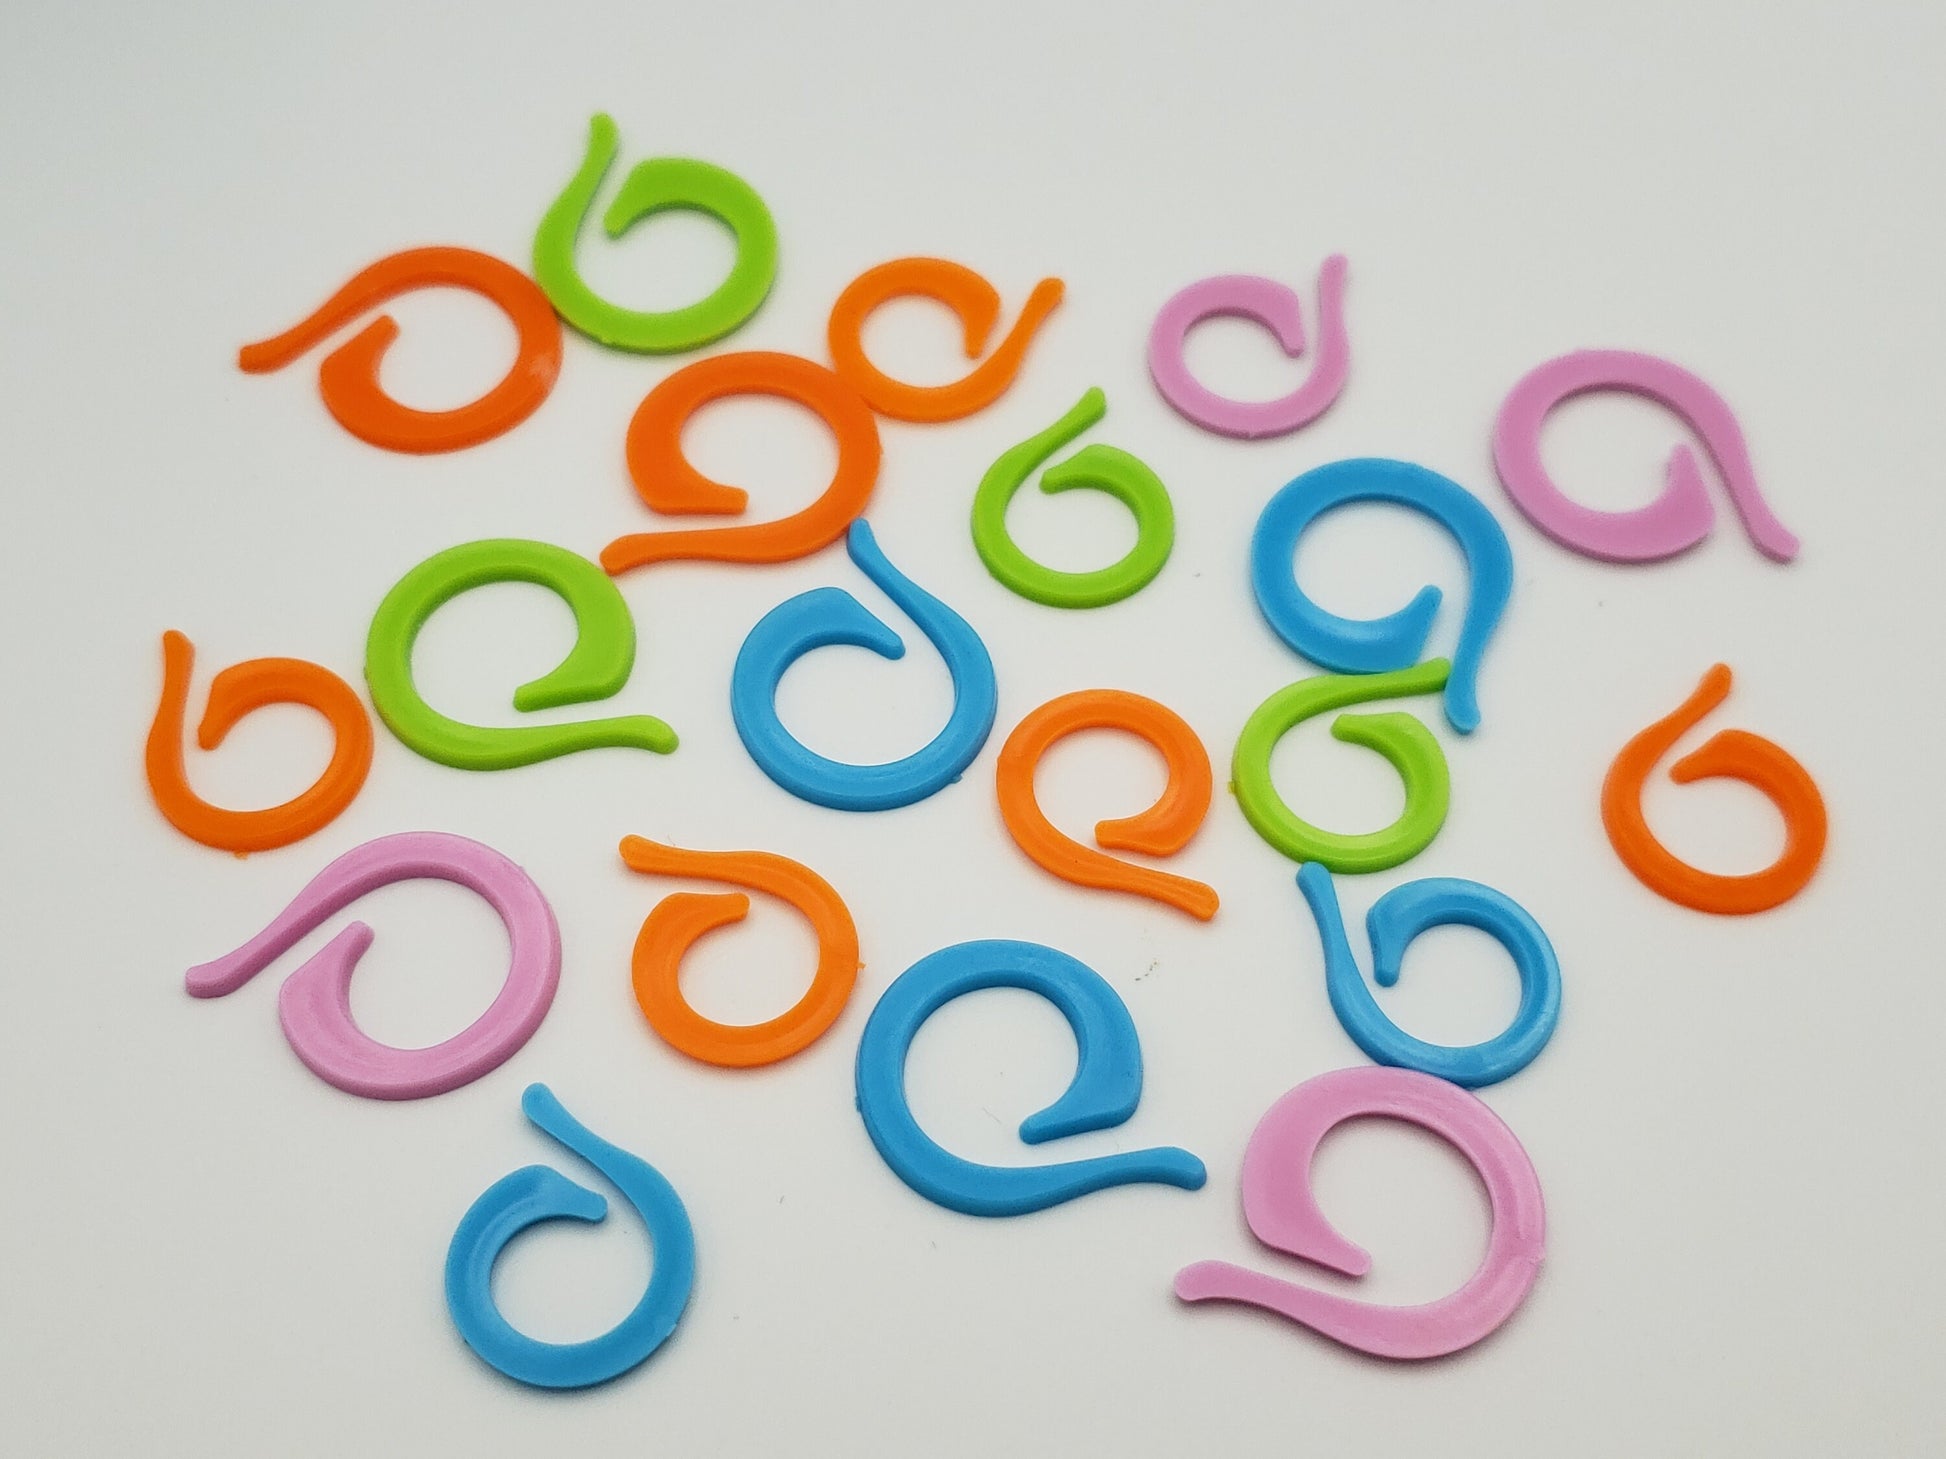 Plastic Stitch Markers for Knitting and Crochet, 10 or 20pc, open coil rings | Crochet stitch marker, progress keeper, knitting accessory